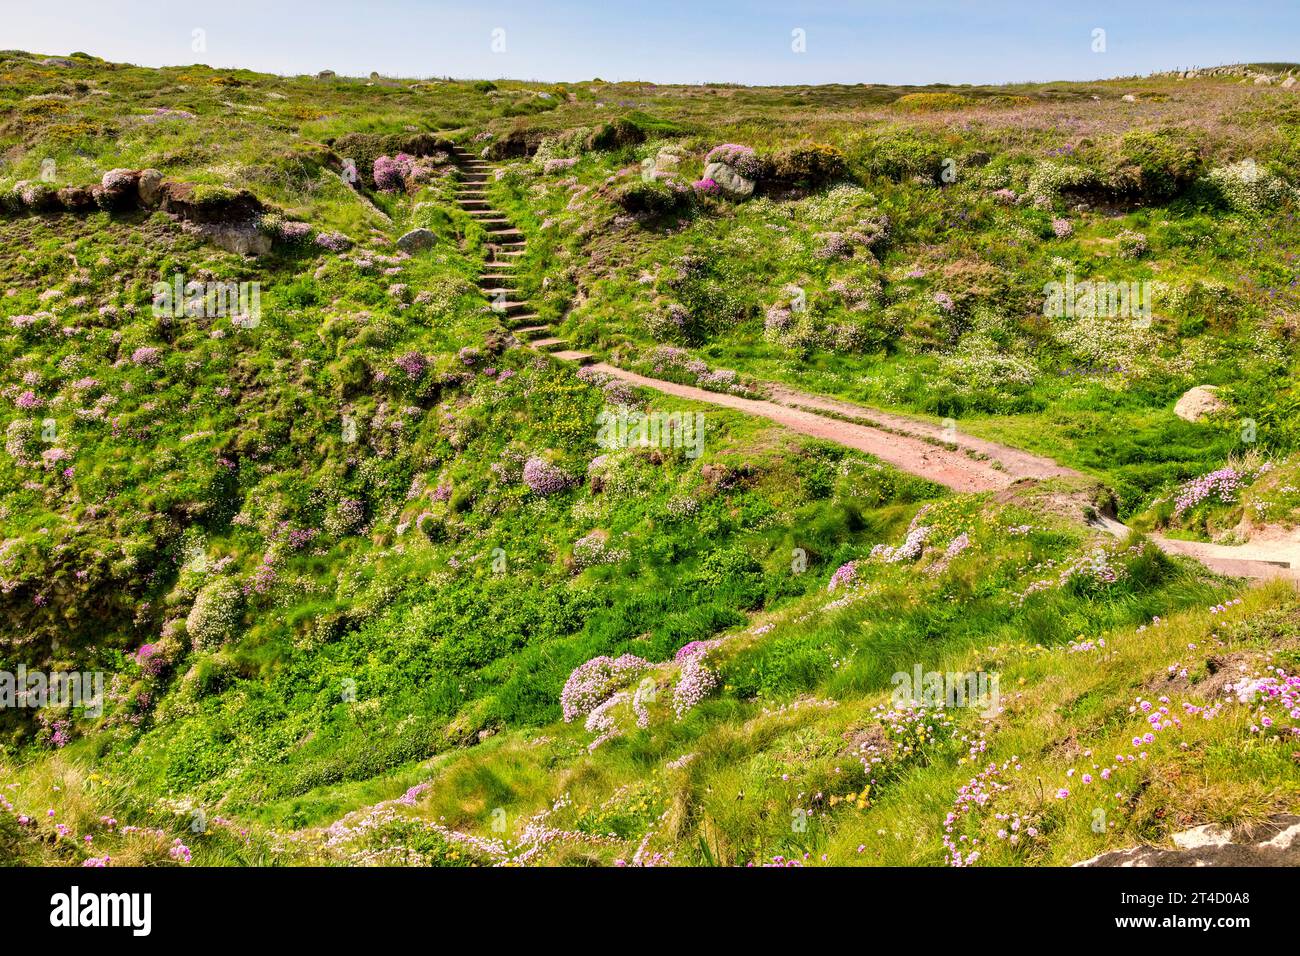 The South West Coast Path between Land's End and Sennen Cove, running through blooming wildflowers. Stock Photo